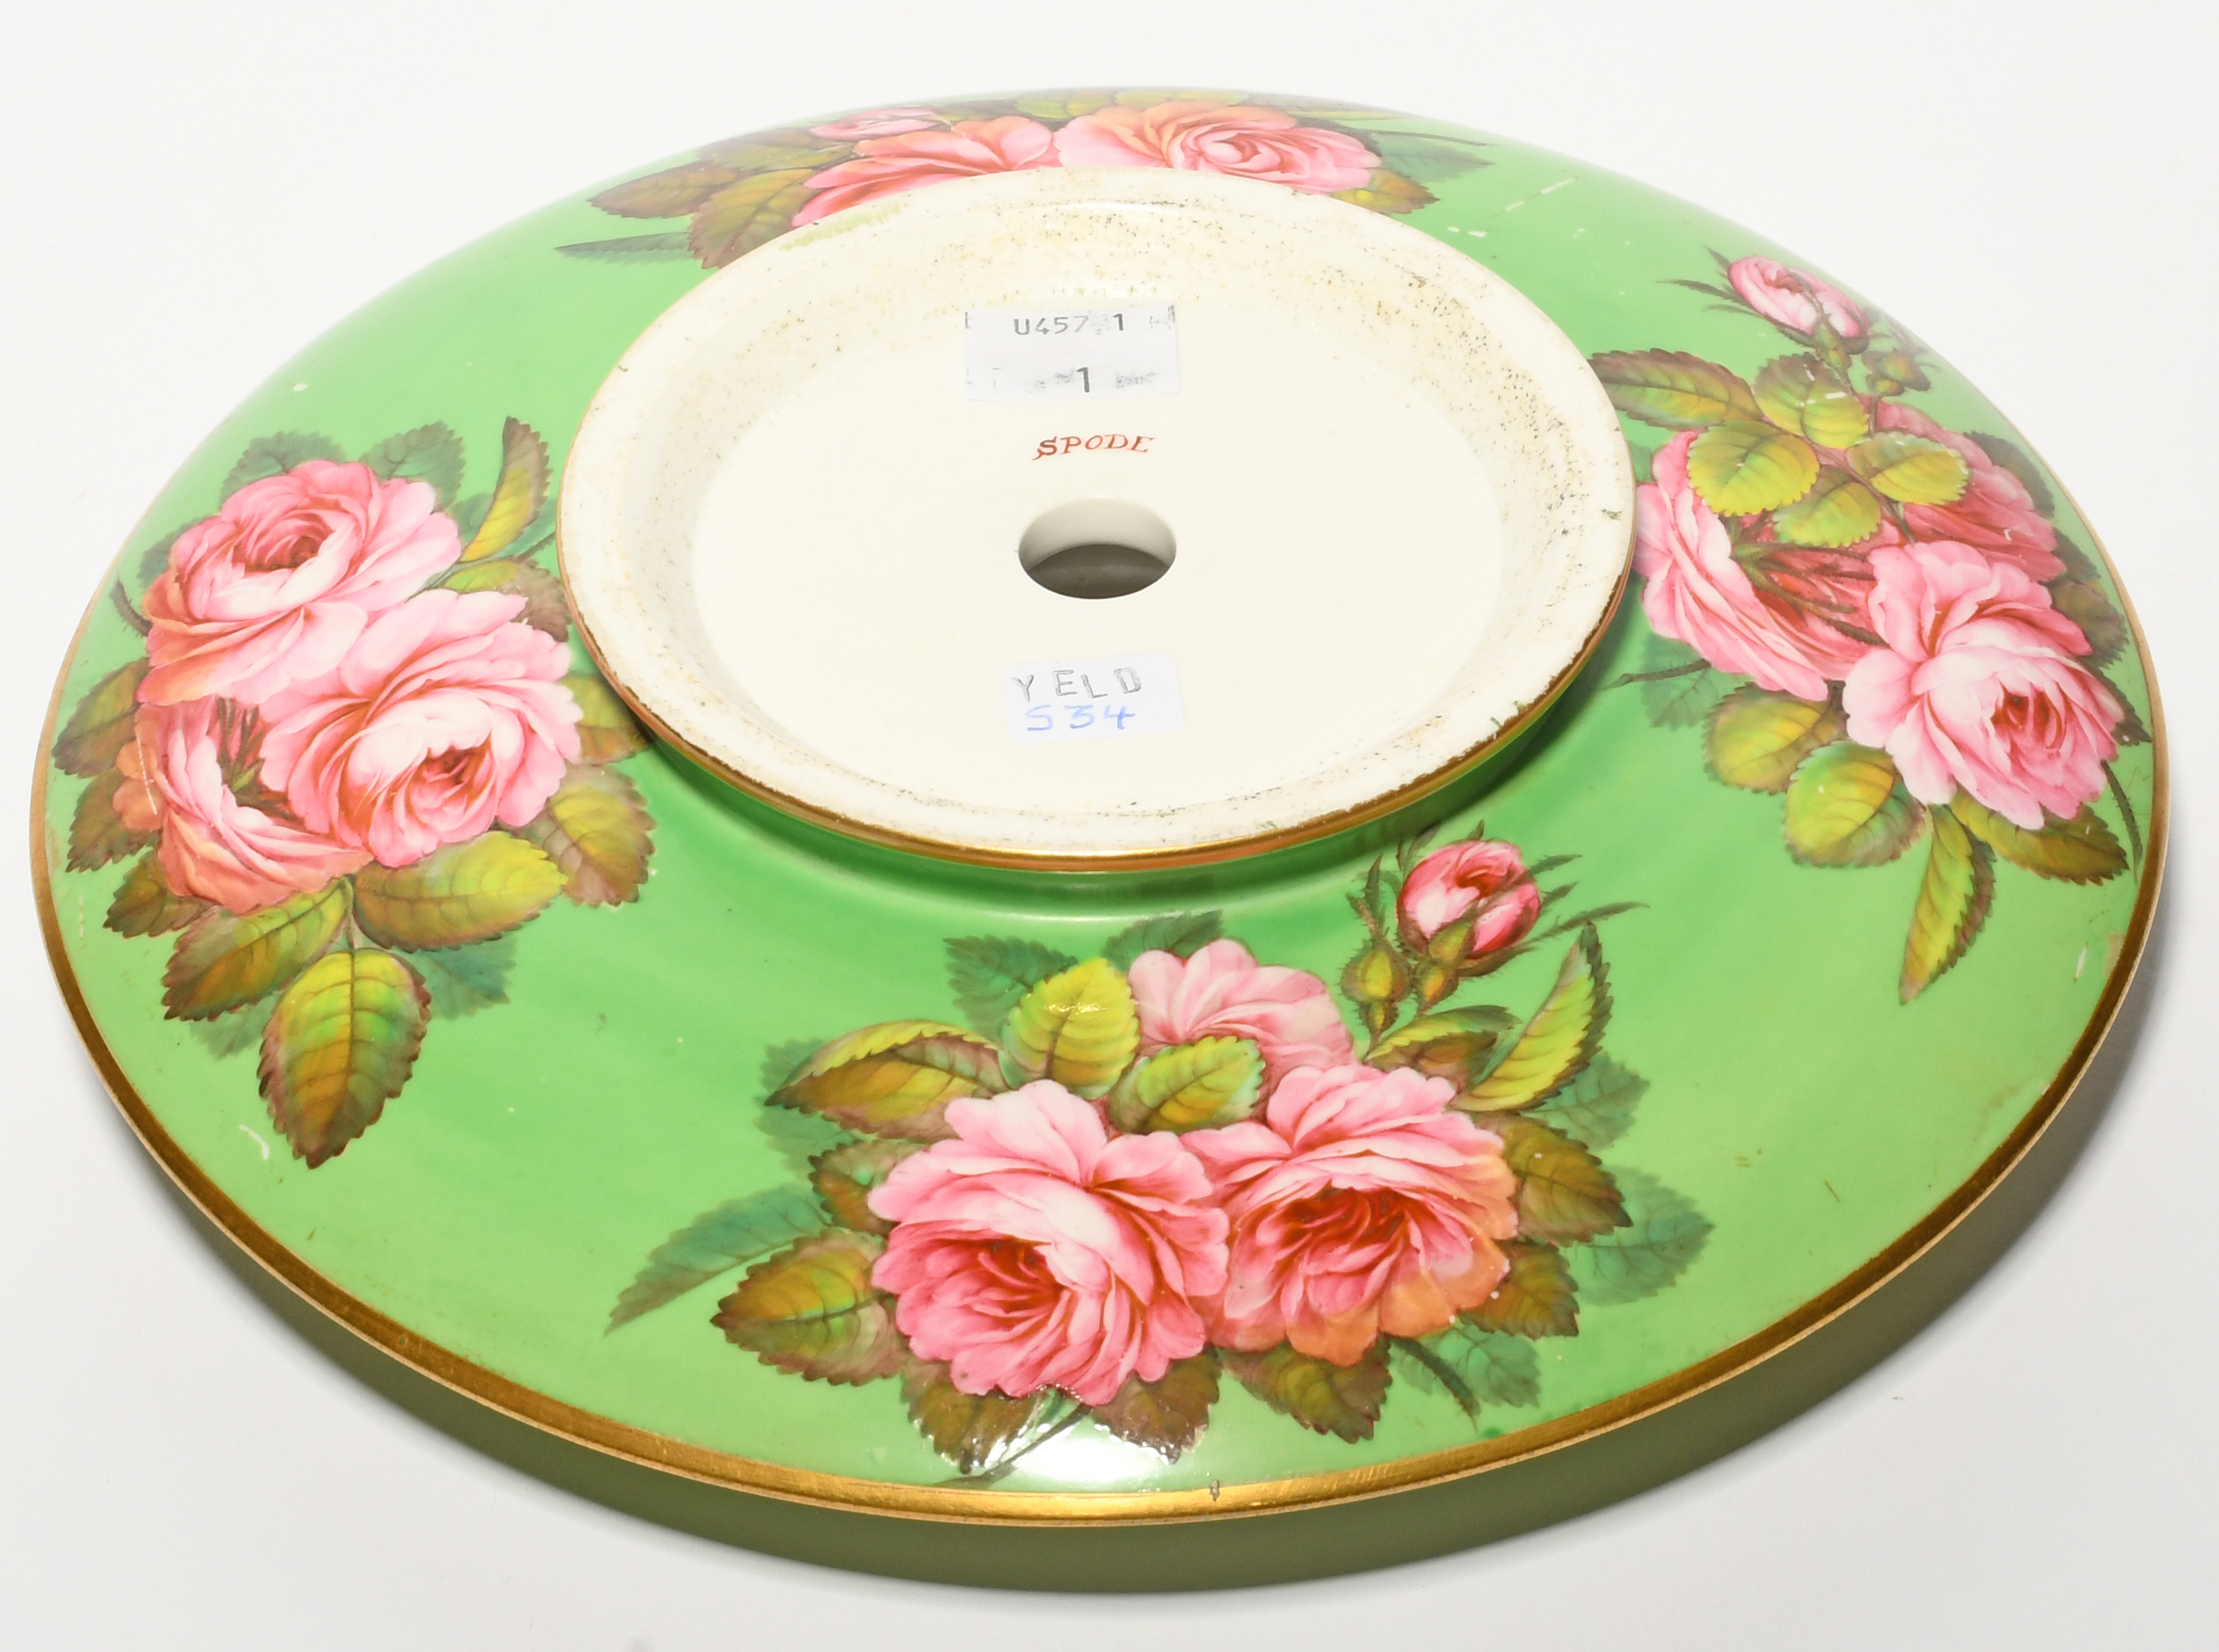 A rare Spode pineapple stand, c.1815-20, painted with large sprays of pink rose and moulded with - Image 3 of 3